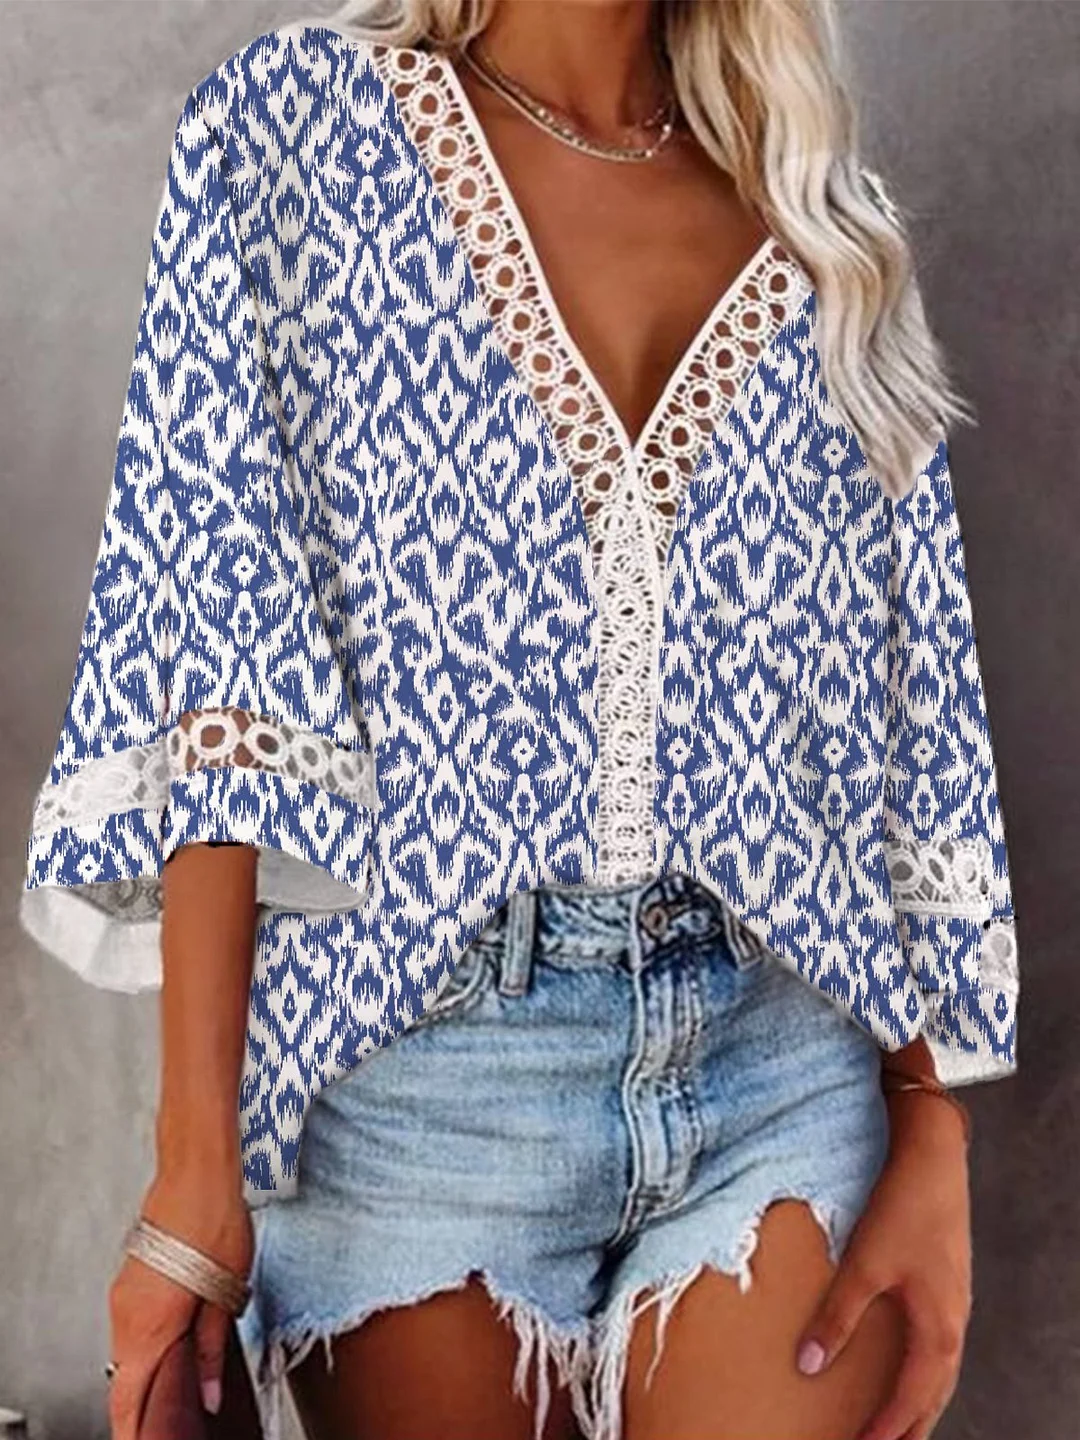 Women's Loosen Top Shirt Geometric Tribal Print Lace Patchwork 3/4 Length Sleeve V-Neck Party Fall Spring